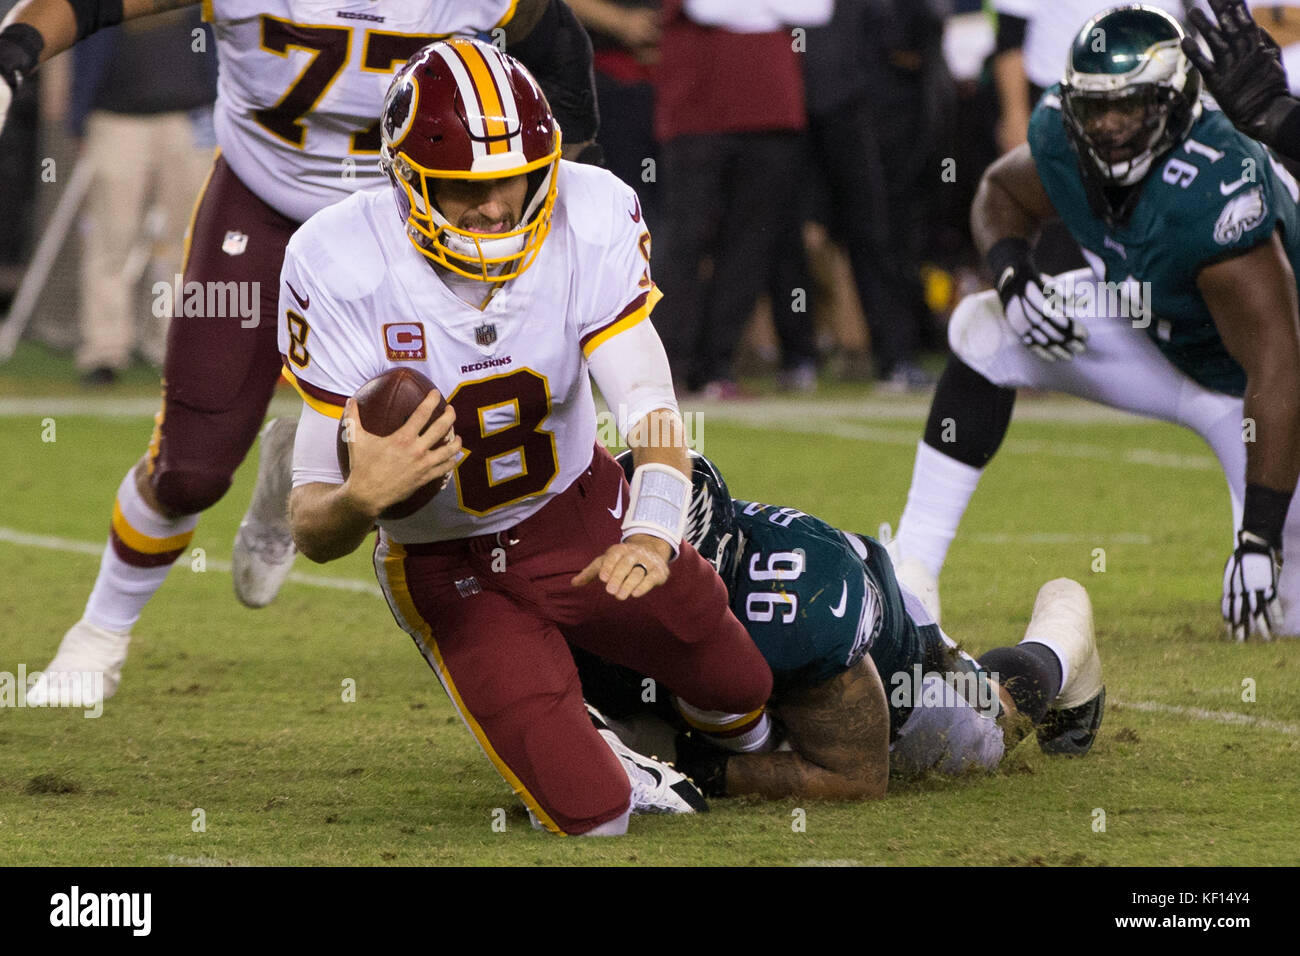 October 23, 2017: Washington Redskins quarterback Kirk Cousins (8) reacts to getting sacked by Philadelphia Eagles defensive end Derek Barnett (96) during the NFL game between the Washington Redskins and the Philadelphia Eagles at Lincoln Financial Field in Philadelphia, Pennsylvania. The Philadelphia Eagles won 34-24. Christopher Szagola/CSM Stock Photo